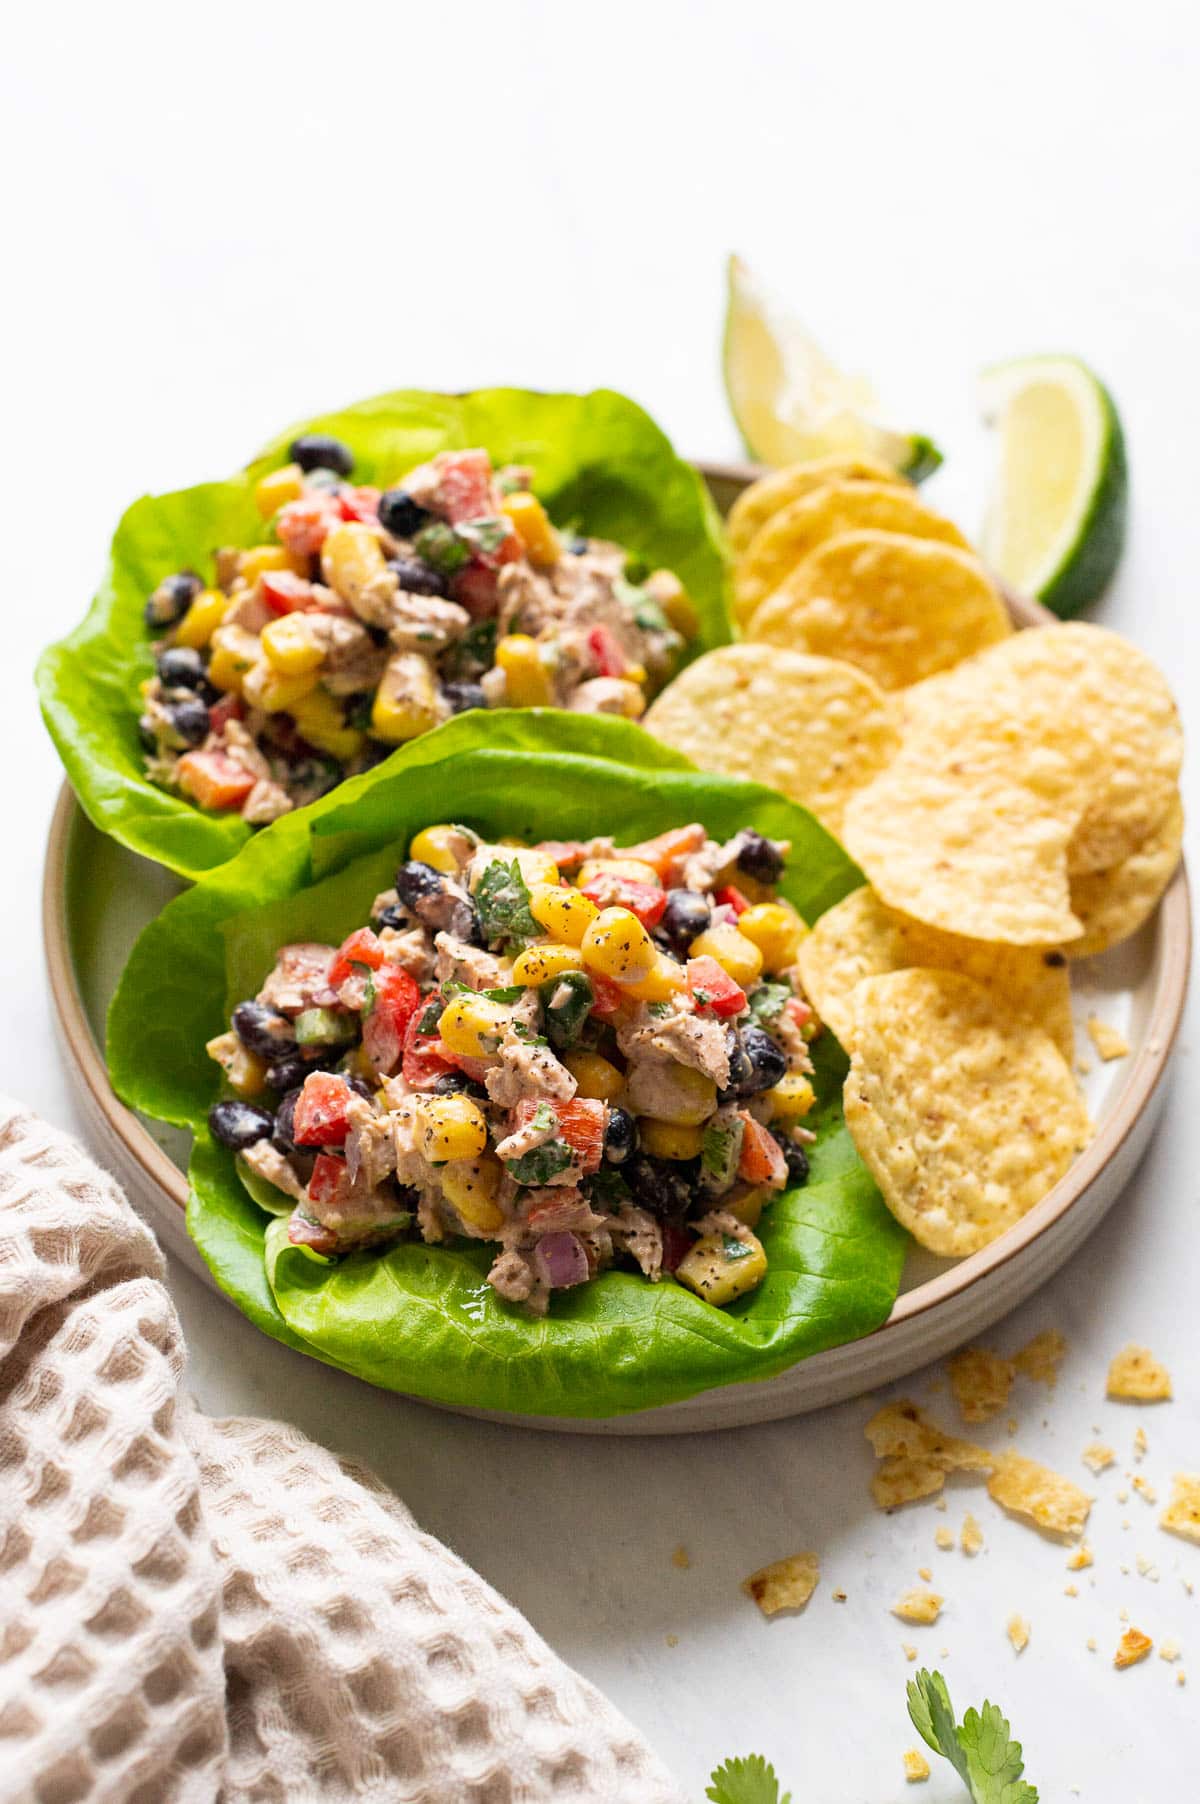 Mexican tuna salad in butter cop leaves with chips on a plate. Towel and lime wedges nearby.